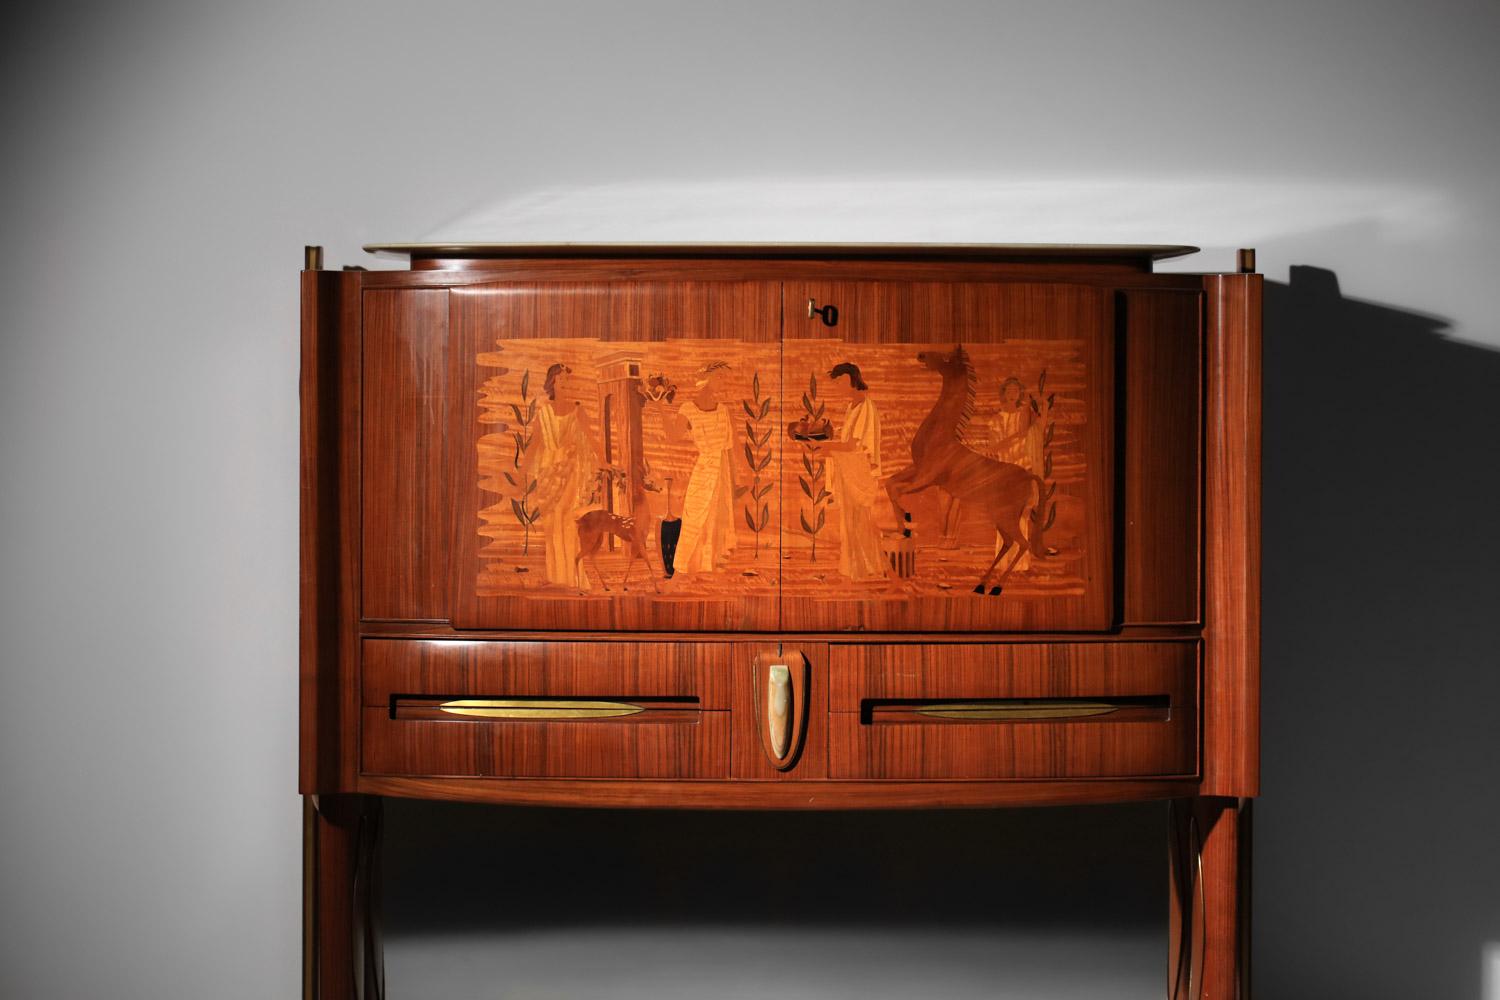 Rare Italian bar furniture from the 60s attributed to Vittorio Dassi. Structure of the buffet in solid and veneered wood with superb art marquetry work across the entire front representing a scene from ancient mythology. This furniture is made up of